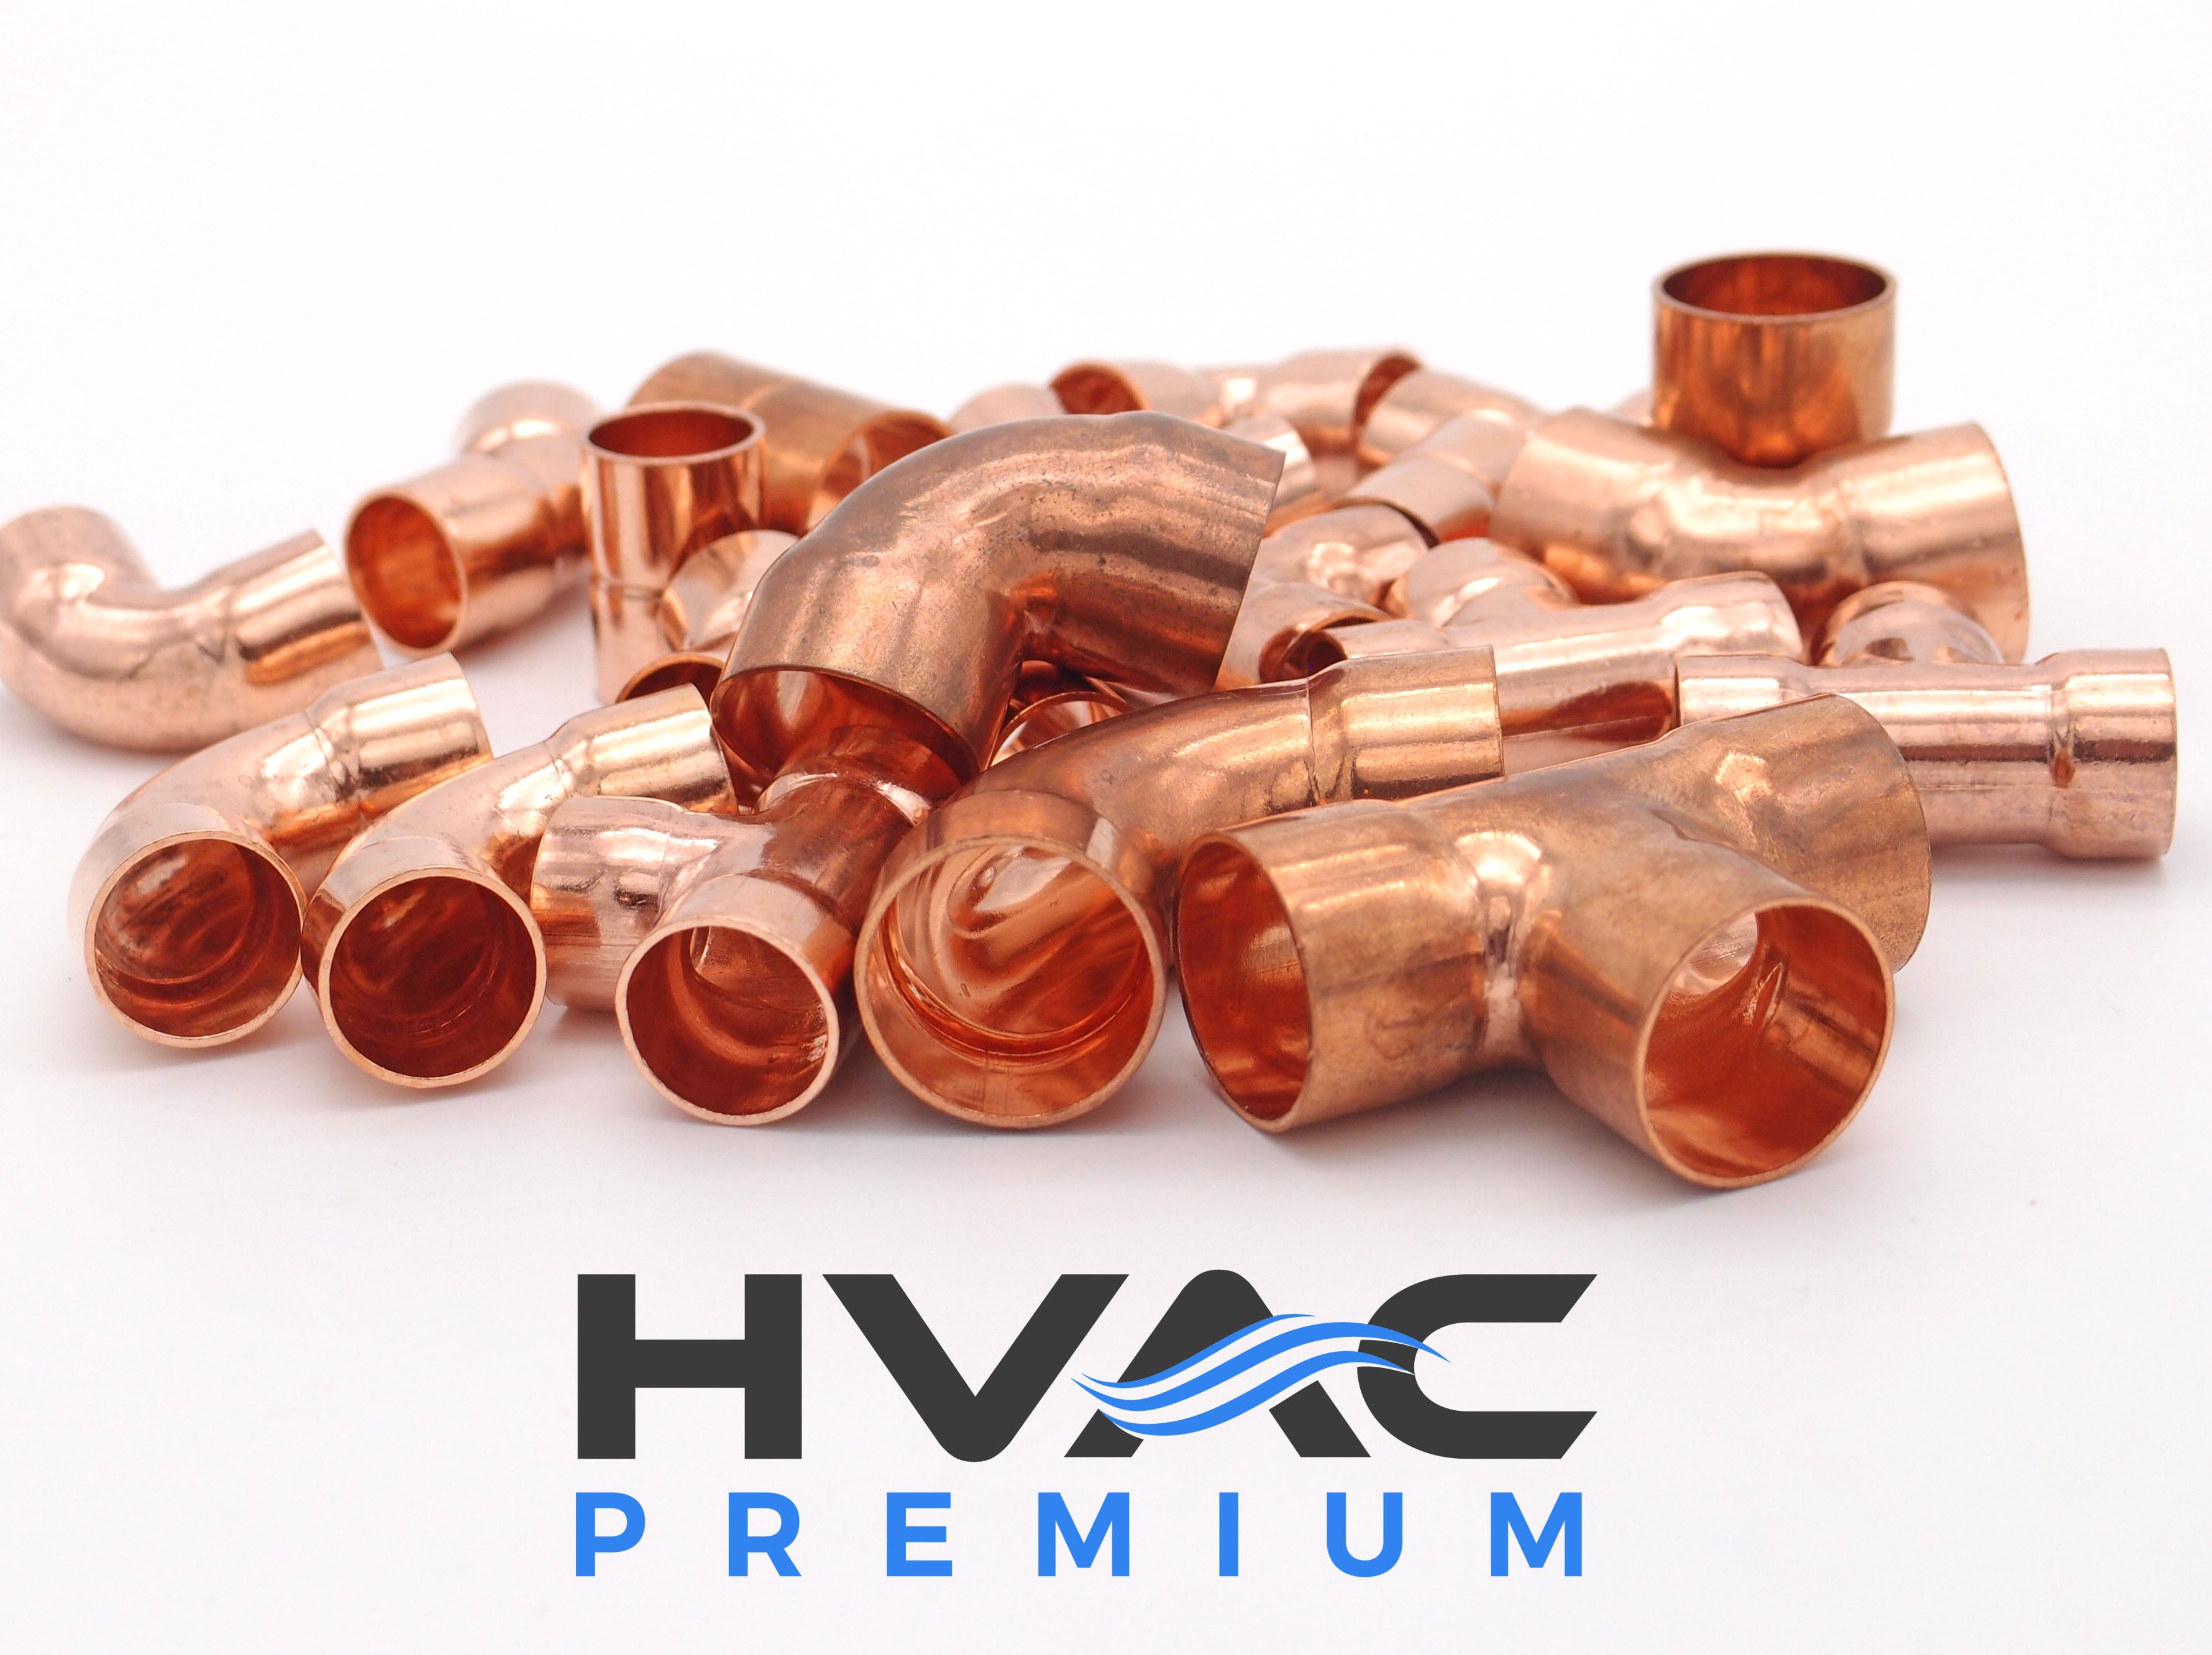 Copper Fitting 1-1/8 Inch (HVAC Outer Dimension) 1 Inch (Plumbing Inner Dimension) - Straight Copper Coupling Fittings With Rolled Tube Stop & HVAC – 99.9% Pure Copper - 5 Pack